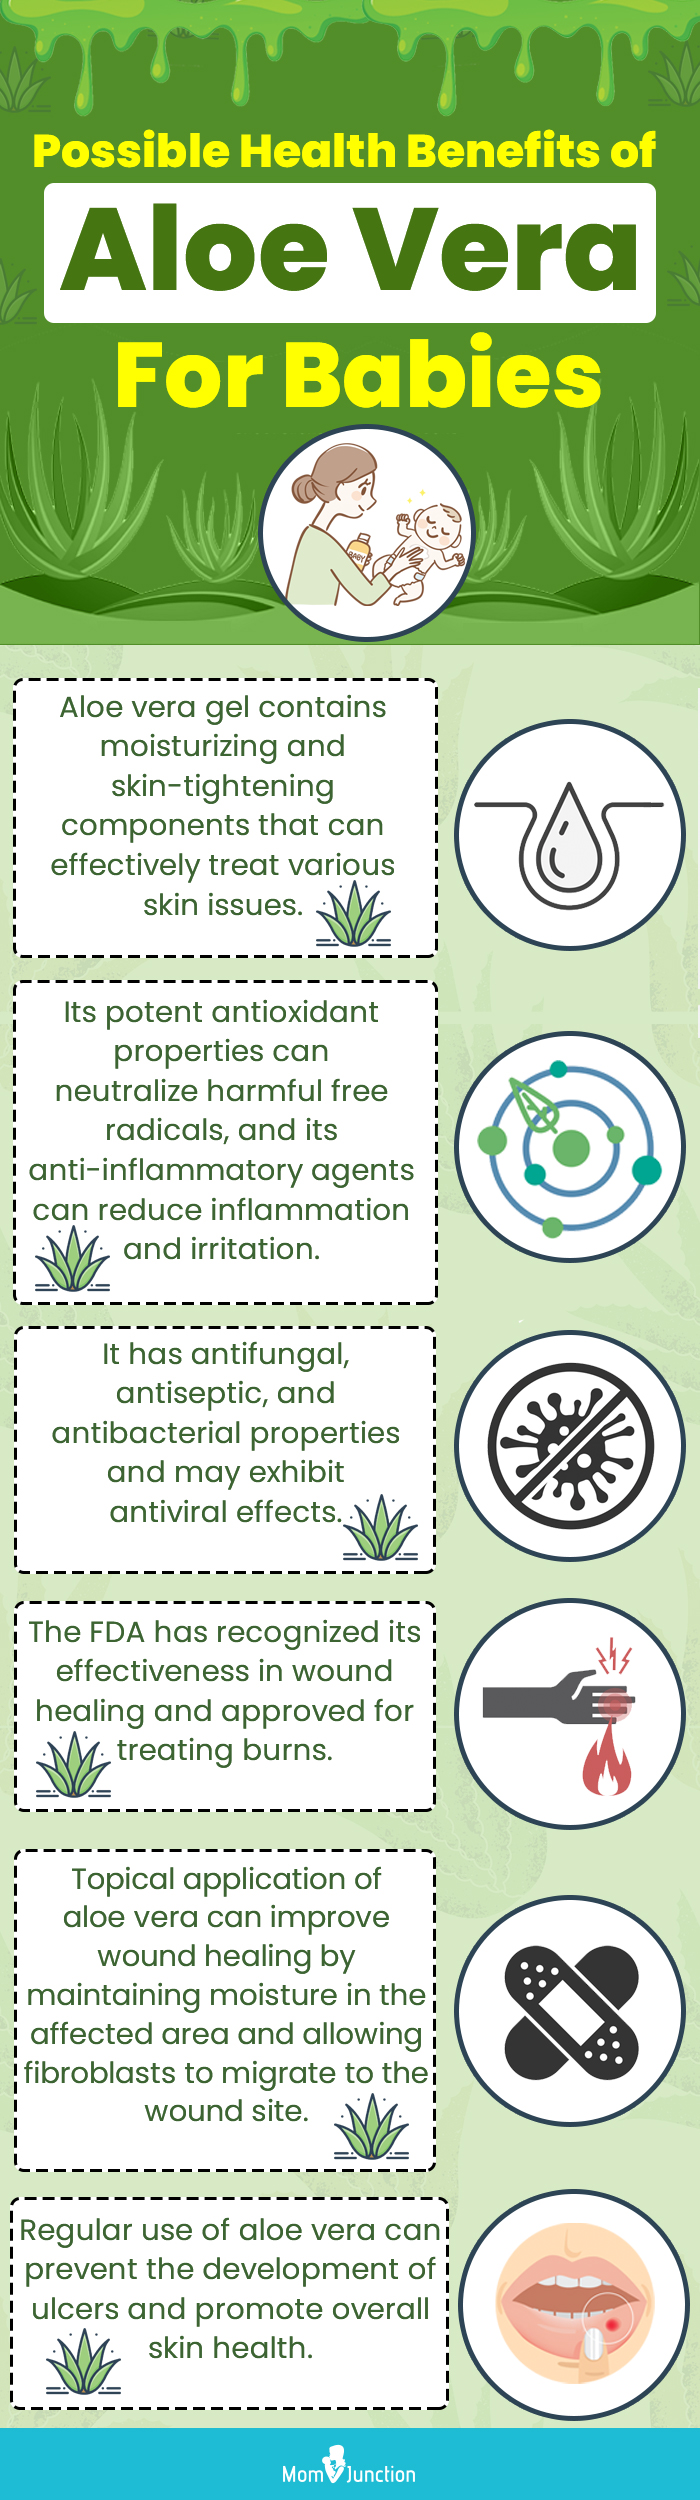 possible health benefits of aloe vera for babies (infographic)